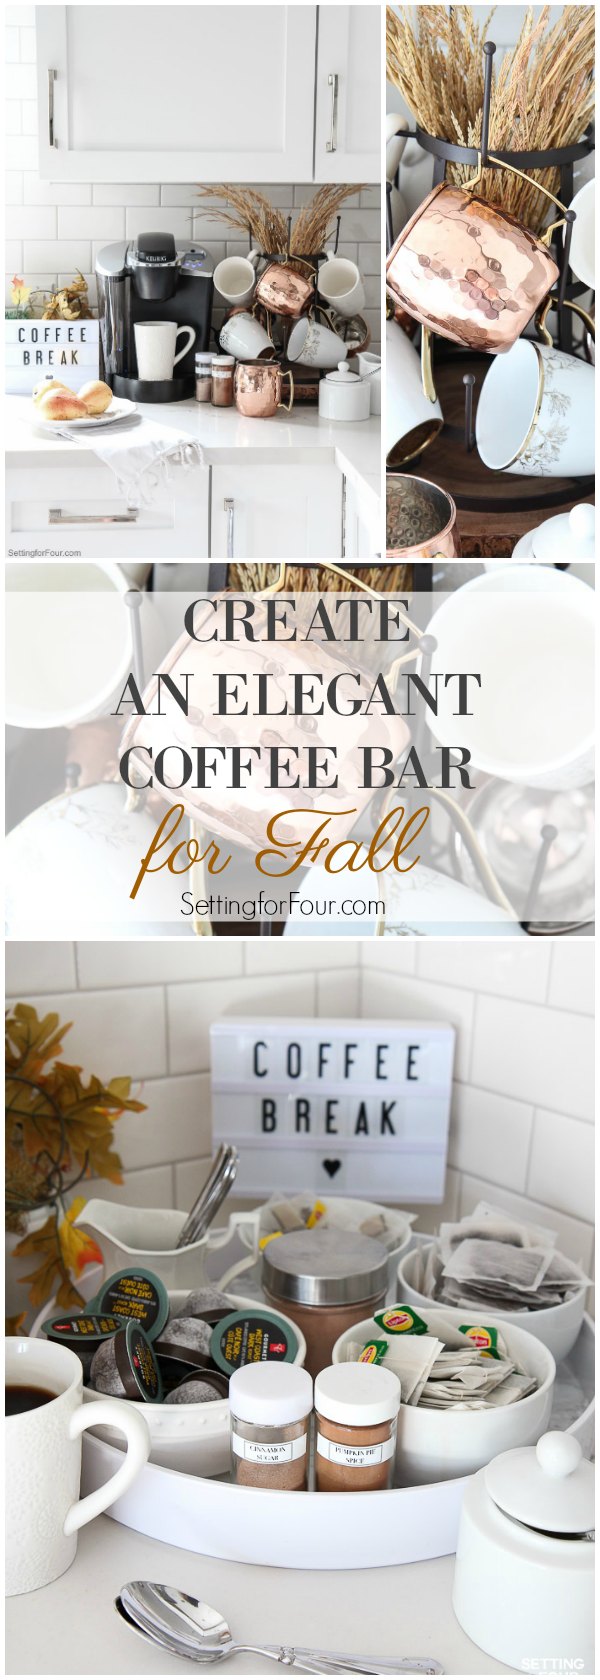 How to create an elegant kitchen coffee bar for Fall that's perfect for family as well as entertaining friends and guests! See all the details: This countertop coffee station decorated with fall foliage is a pretty way to display your coffee pot, mugs, coffees, coffee flavorings and teas!